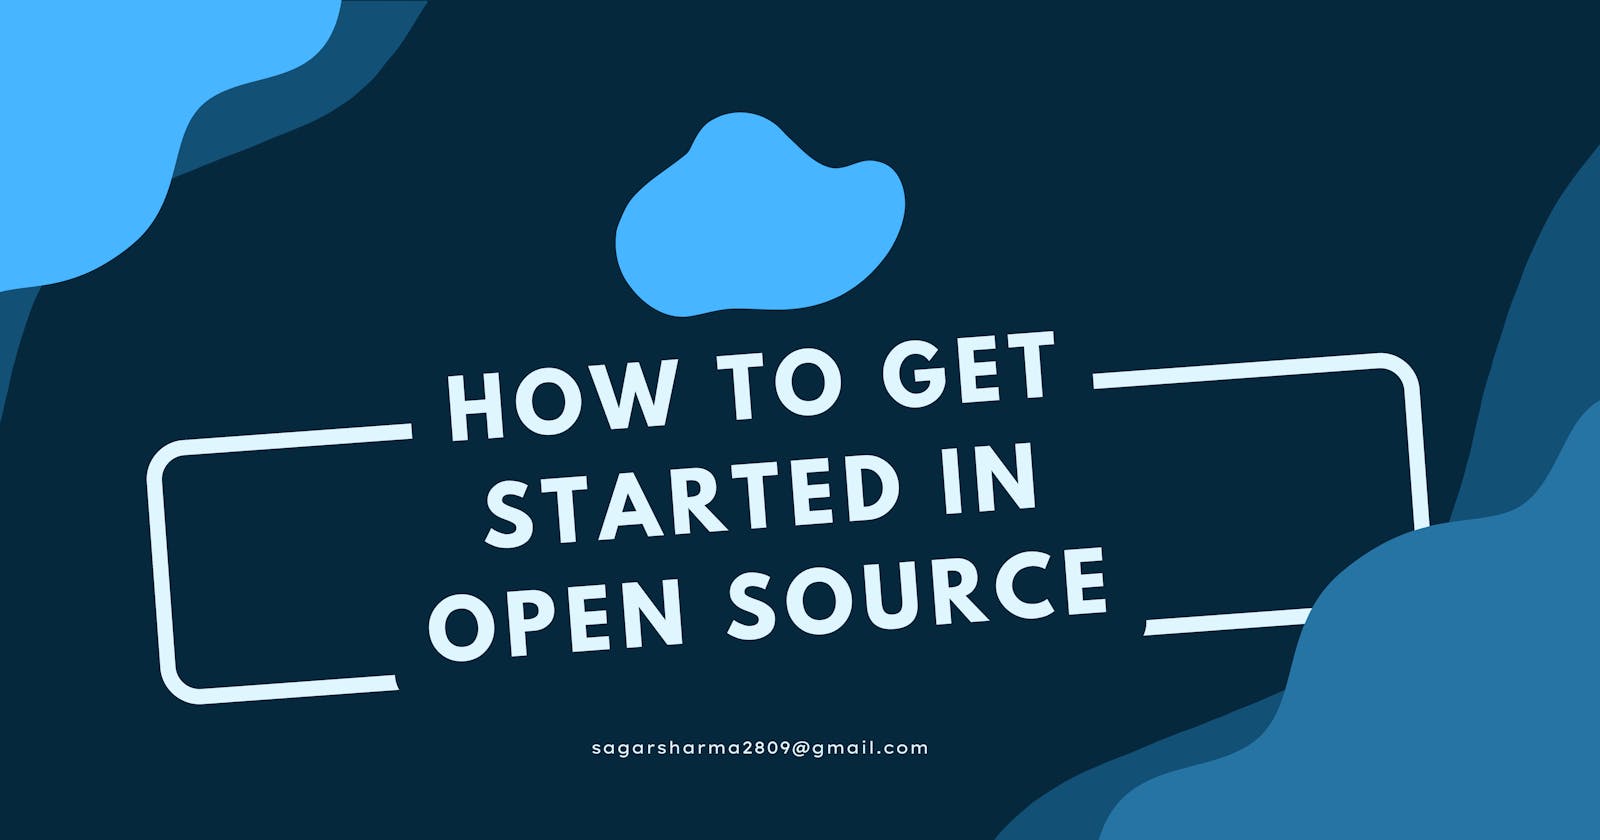 What is Open-Source? How to get Started